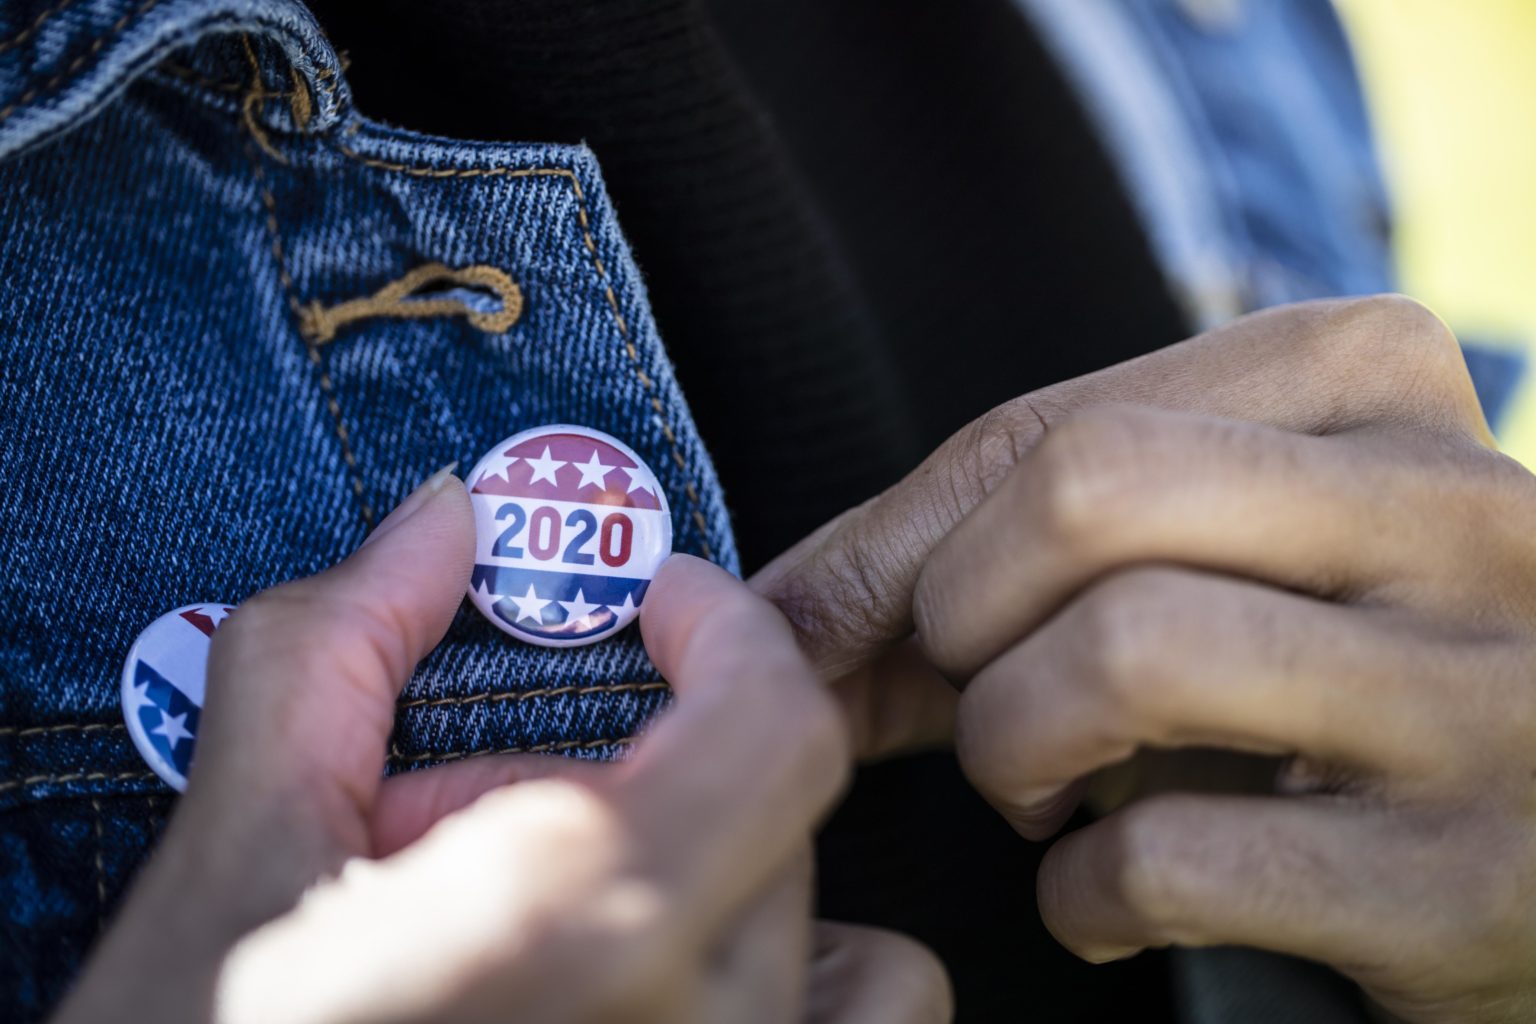 2020 written on a button pinned on a jacket